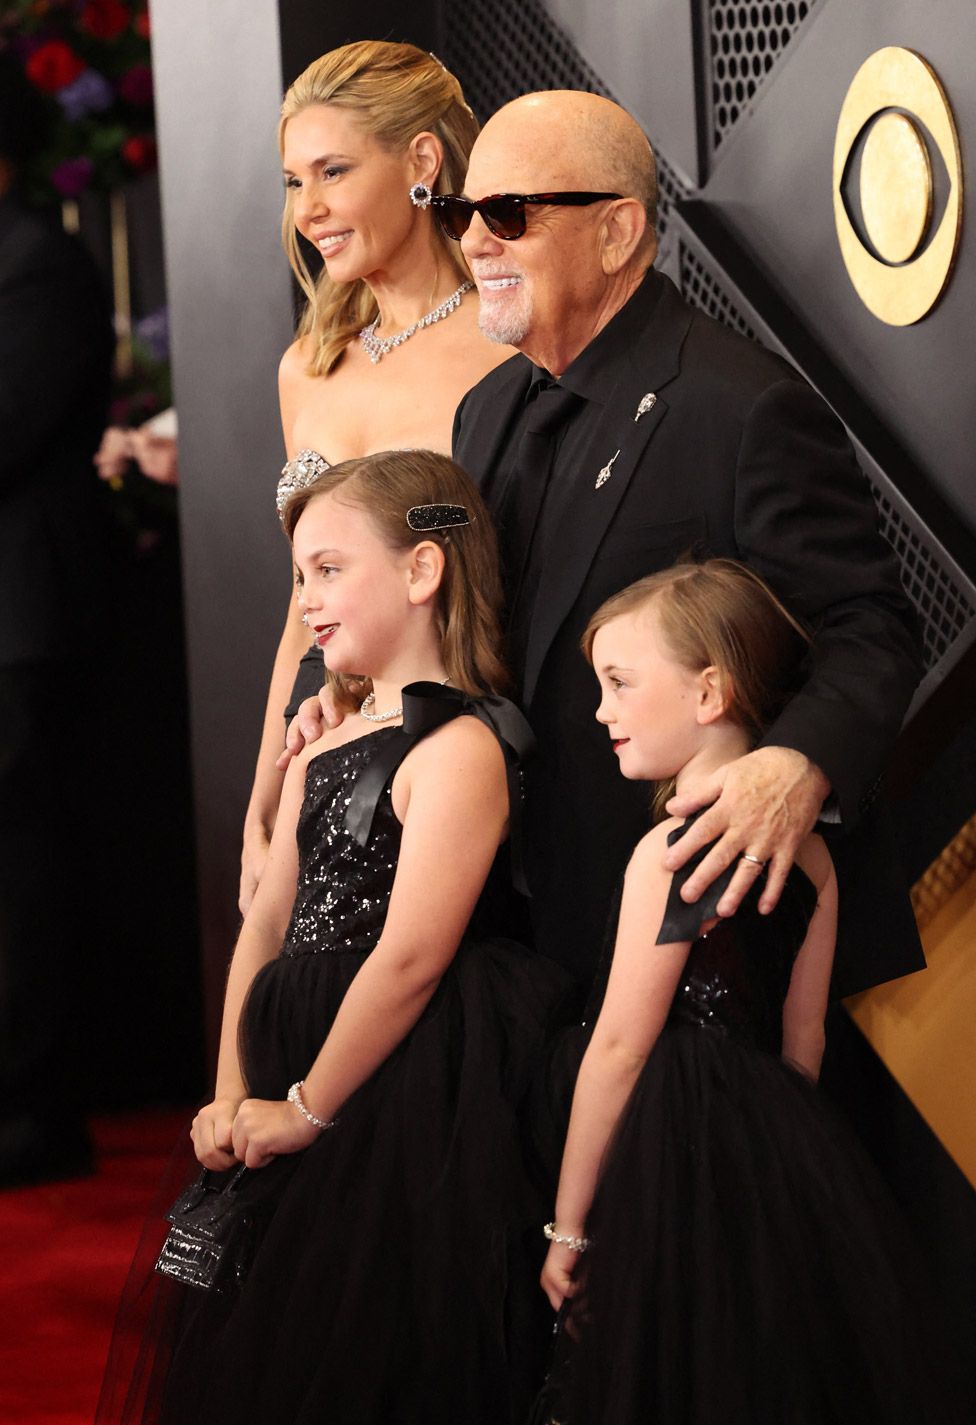 Billy Joel and his family at the Grammys